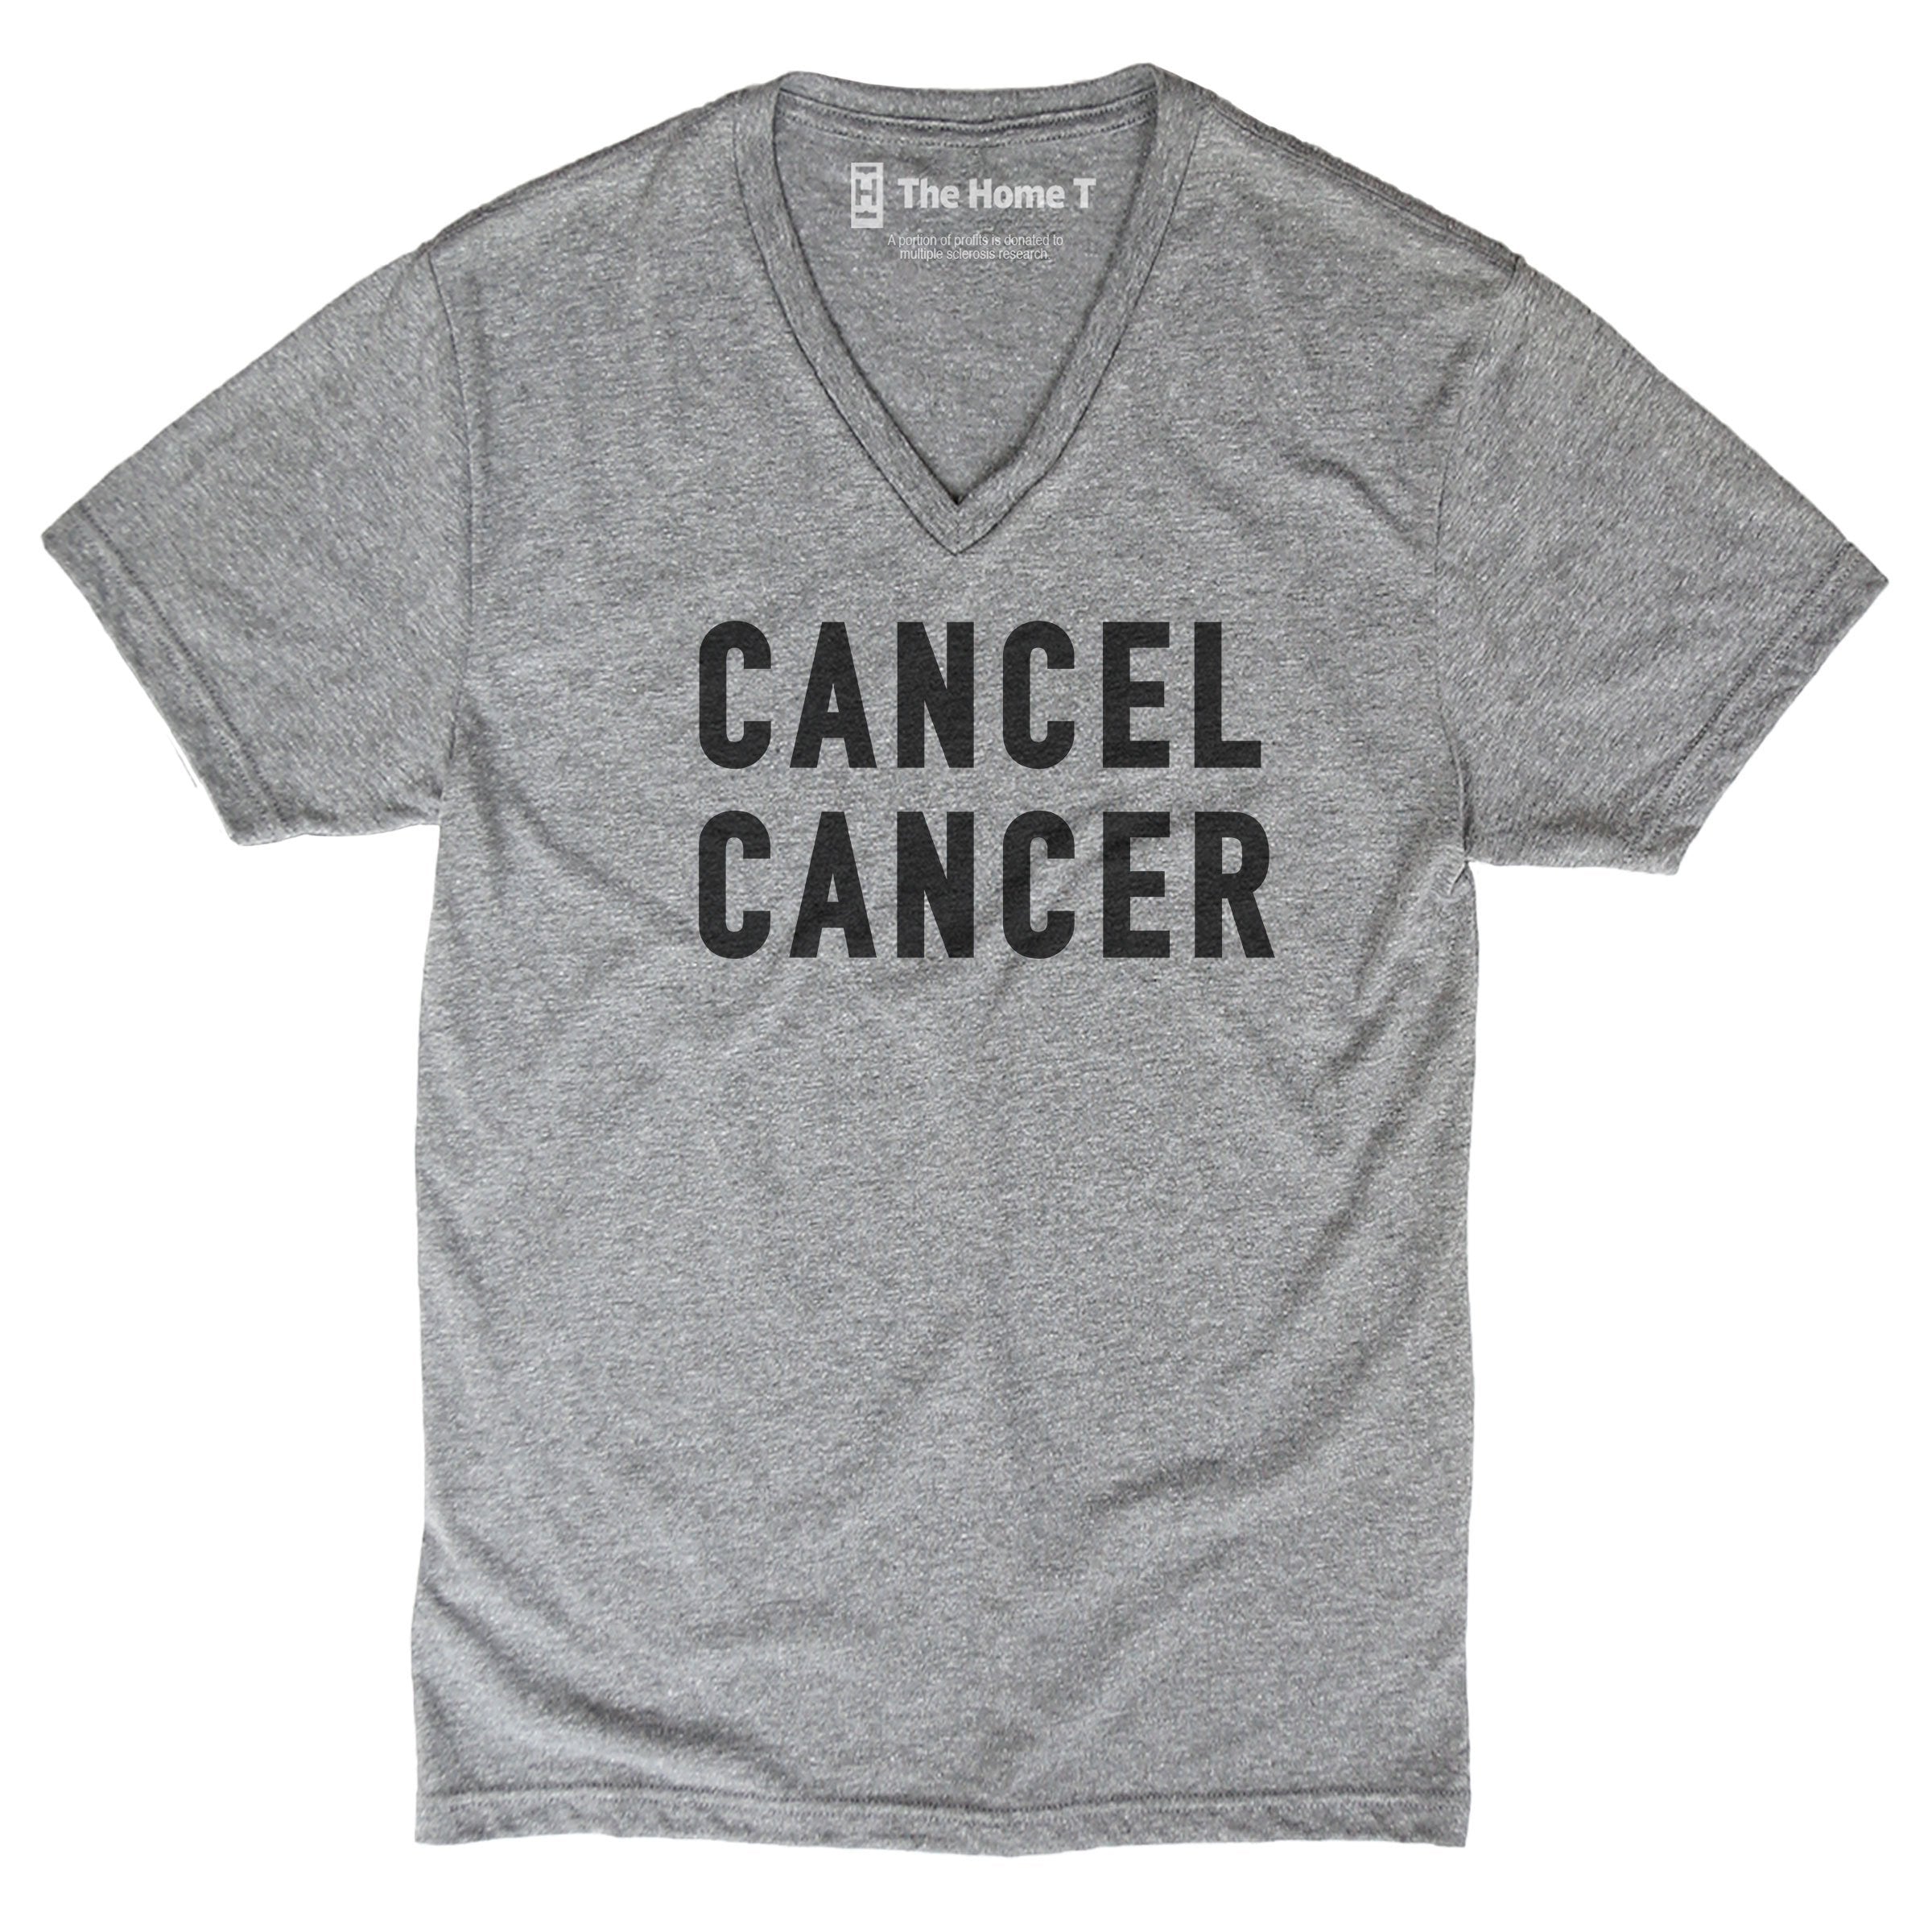 Cancel Cancer The Home T XS V-Neck Athletic Grey